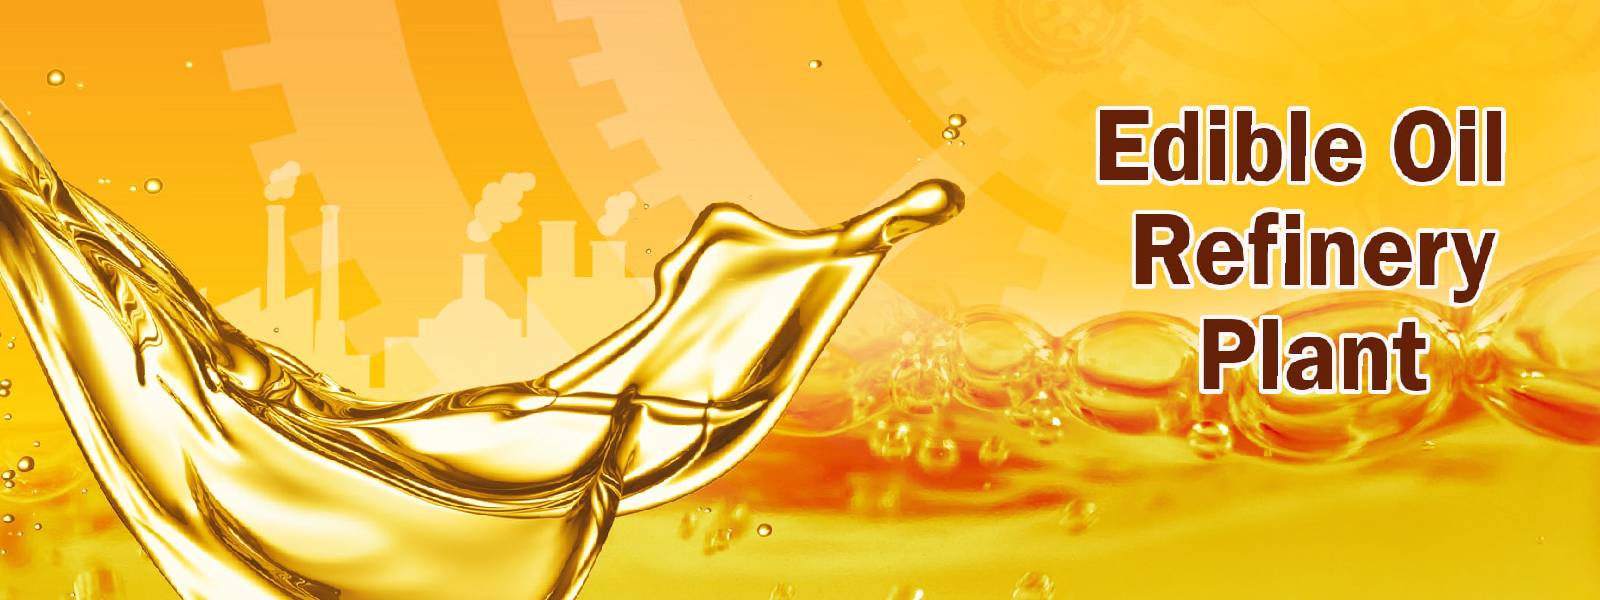 Edible Oil Machinery Manufacturer